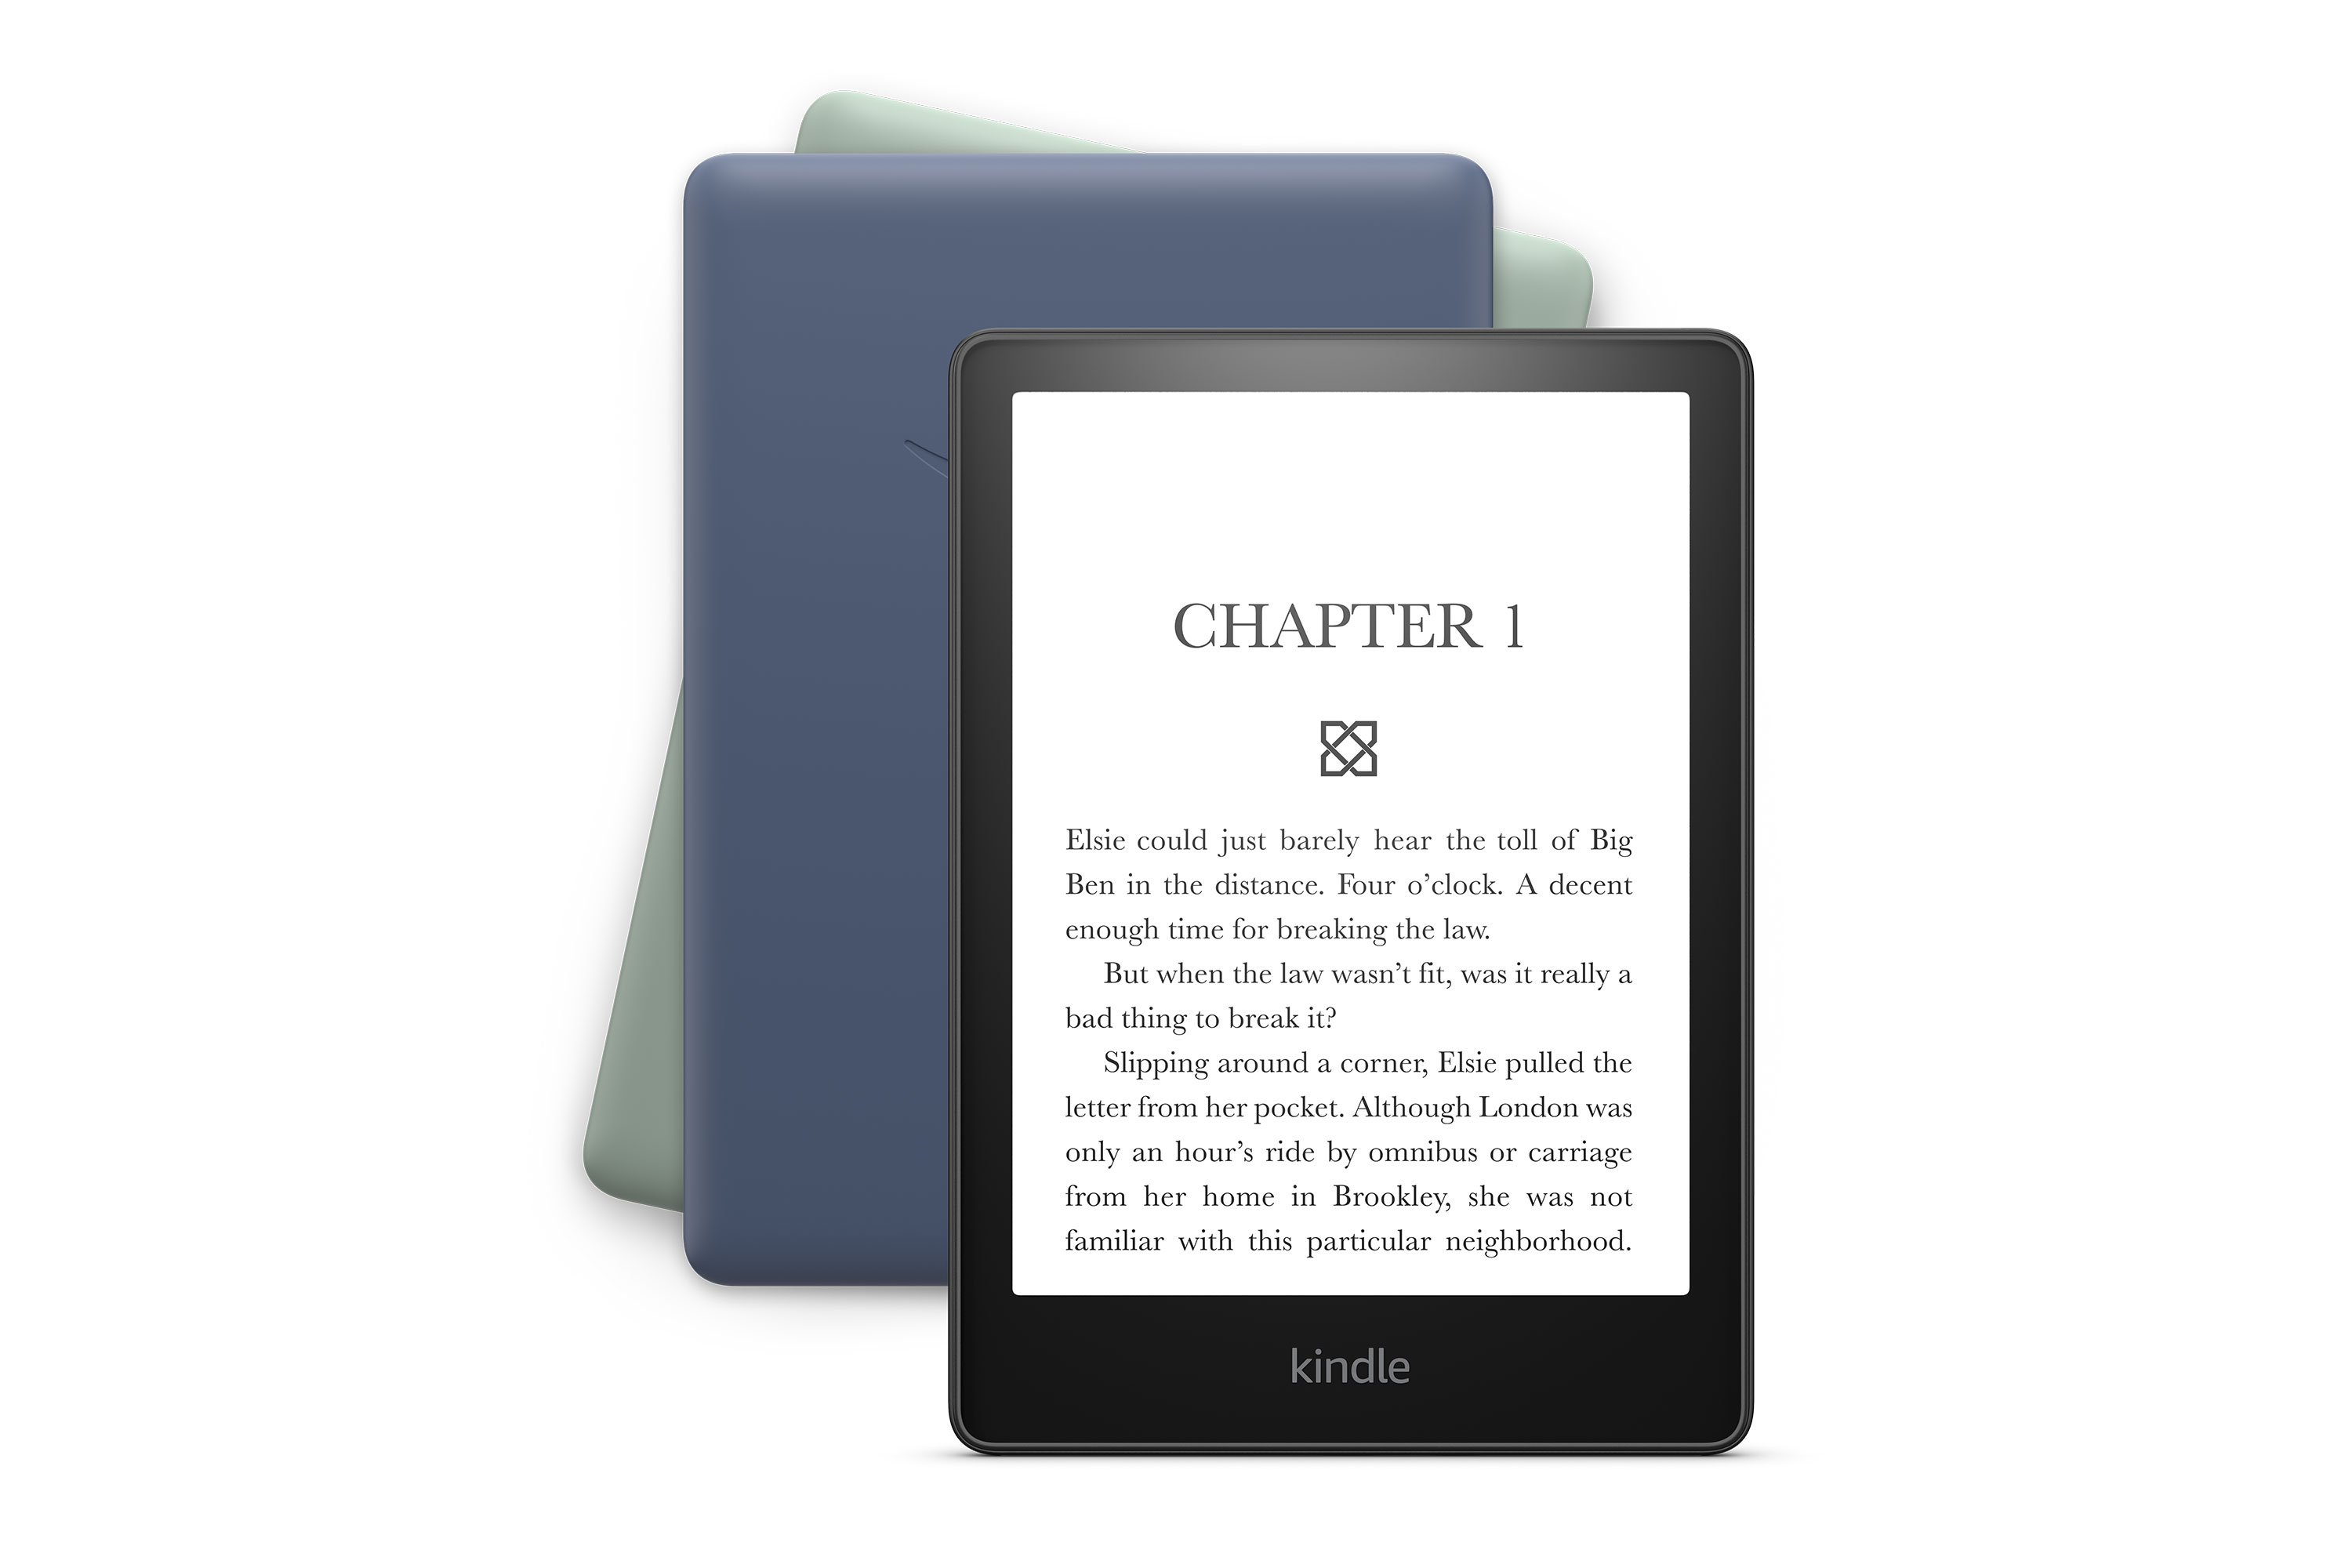 Kindle Paperwhite in black, blue, and green.